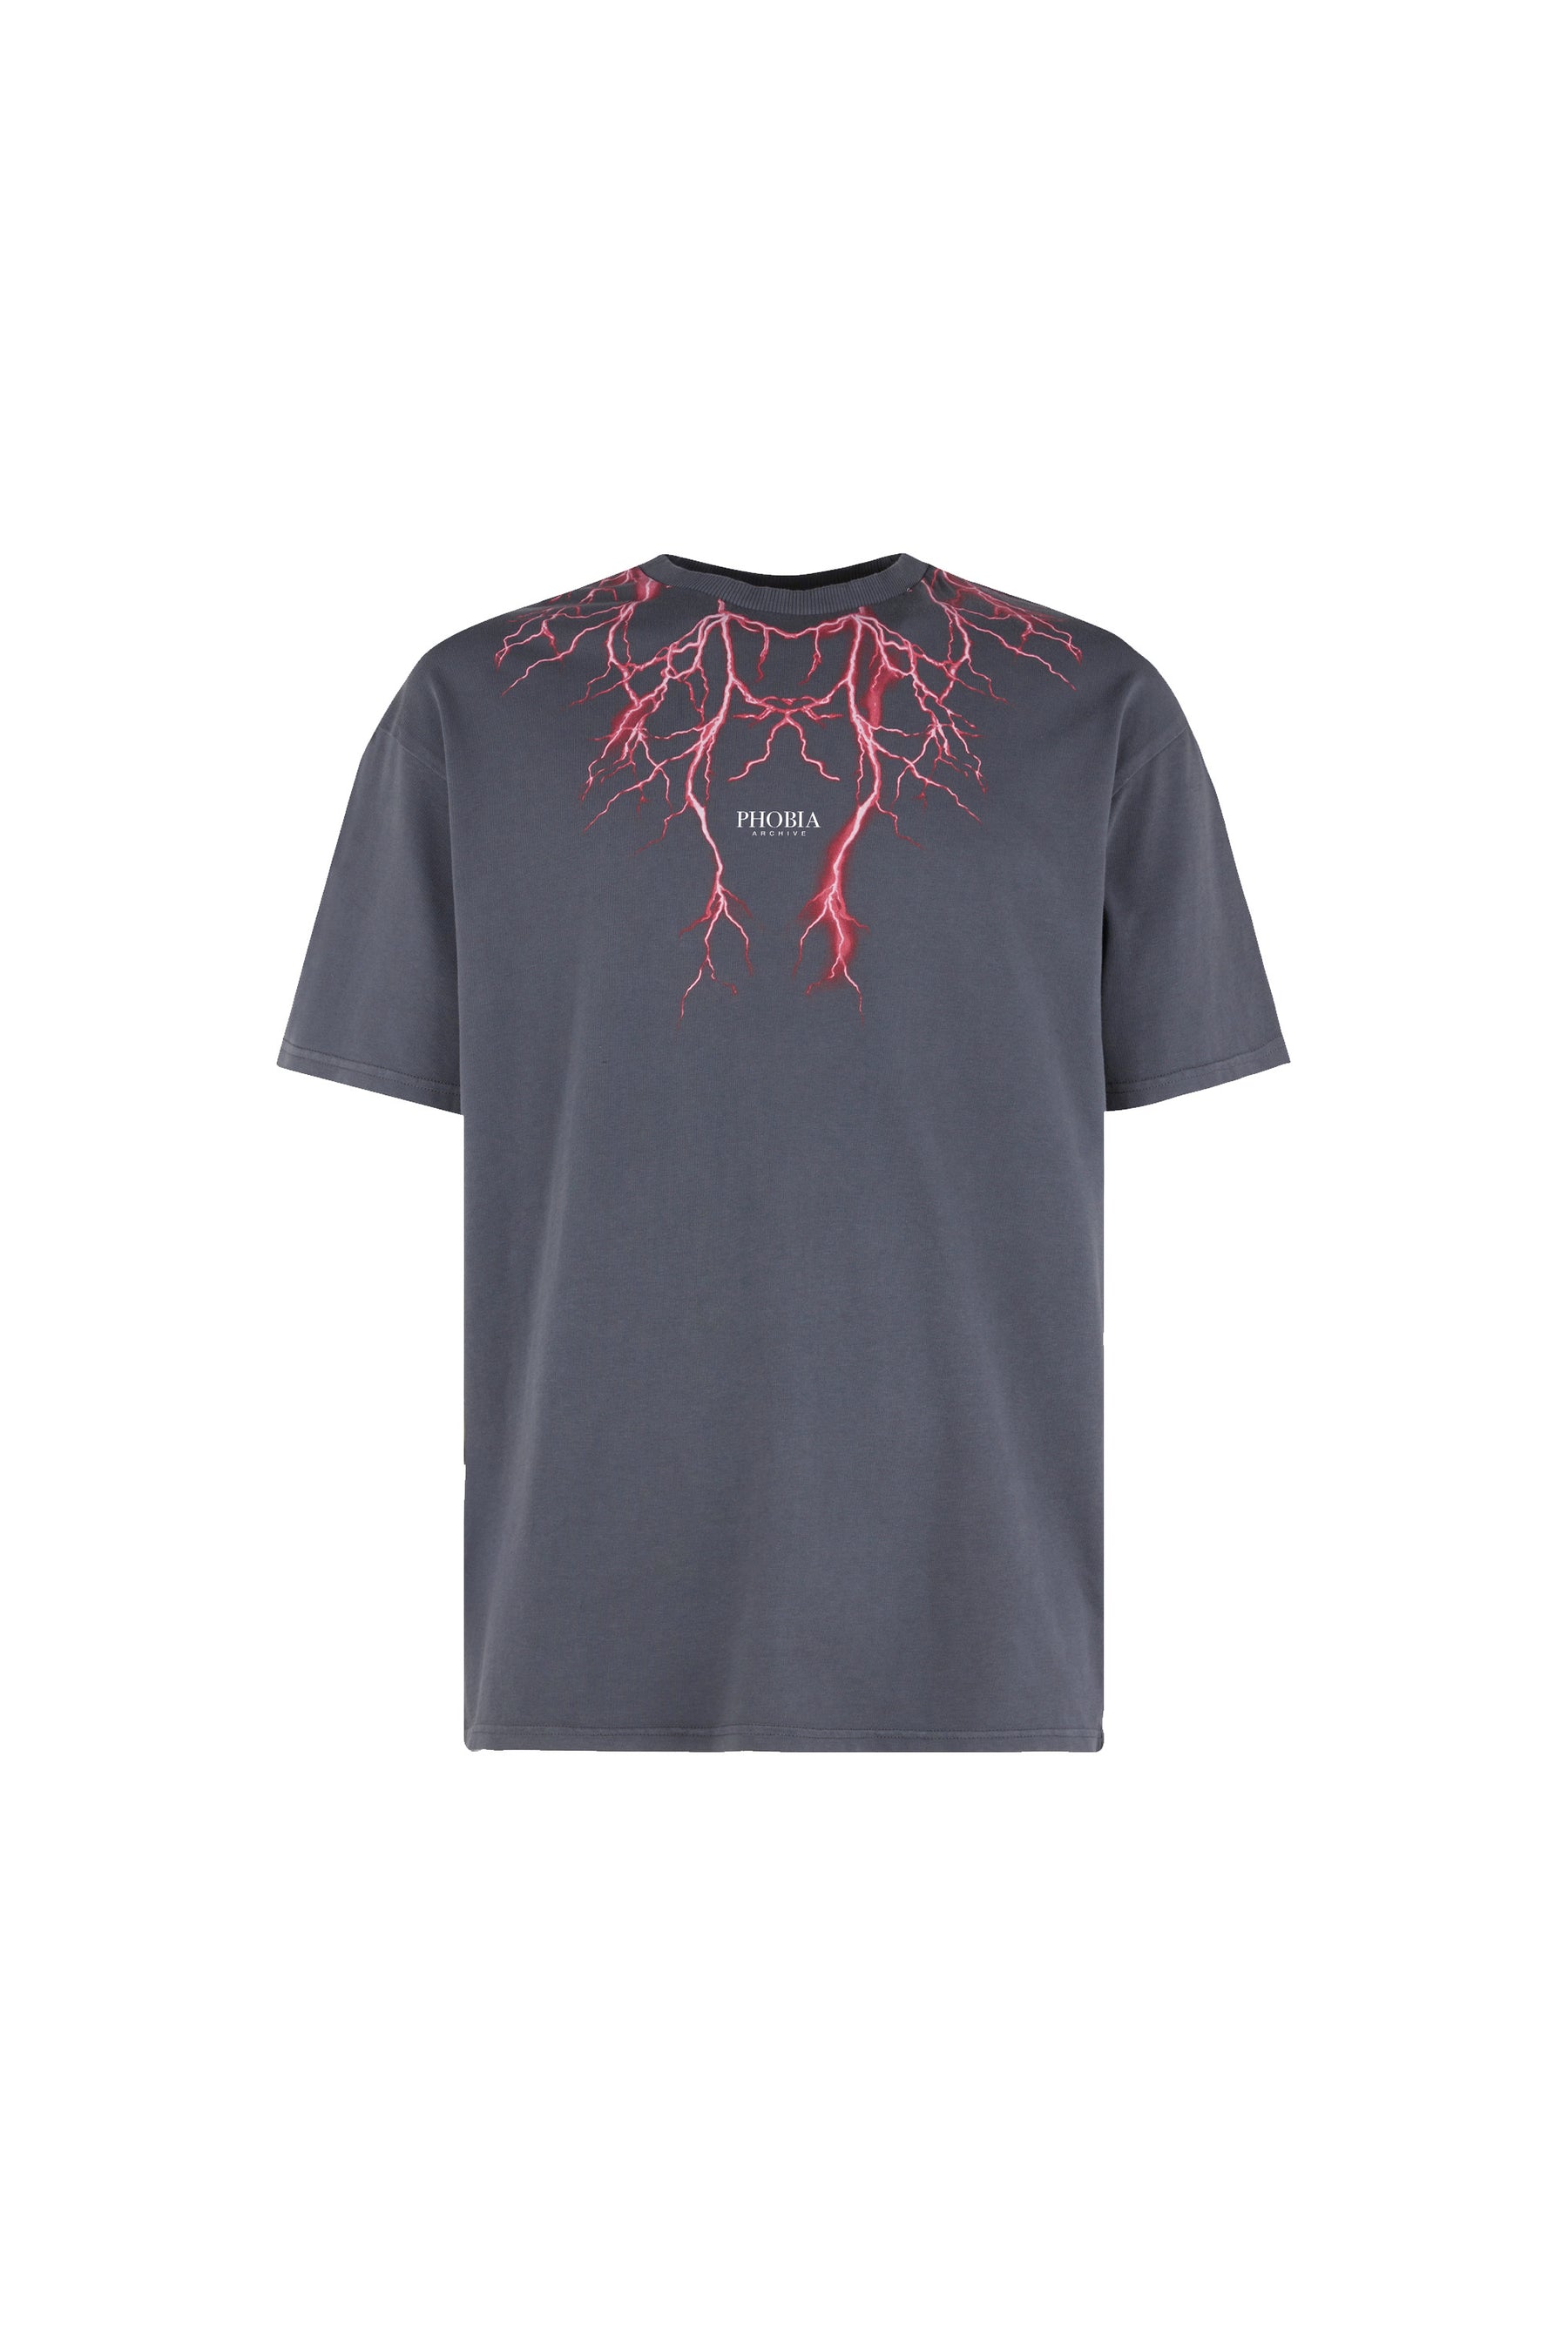 PHOBIA Grey T-Shirt with Red lightning on front